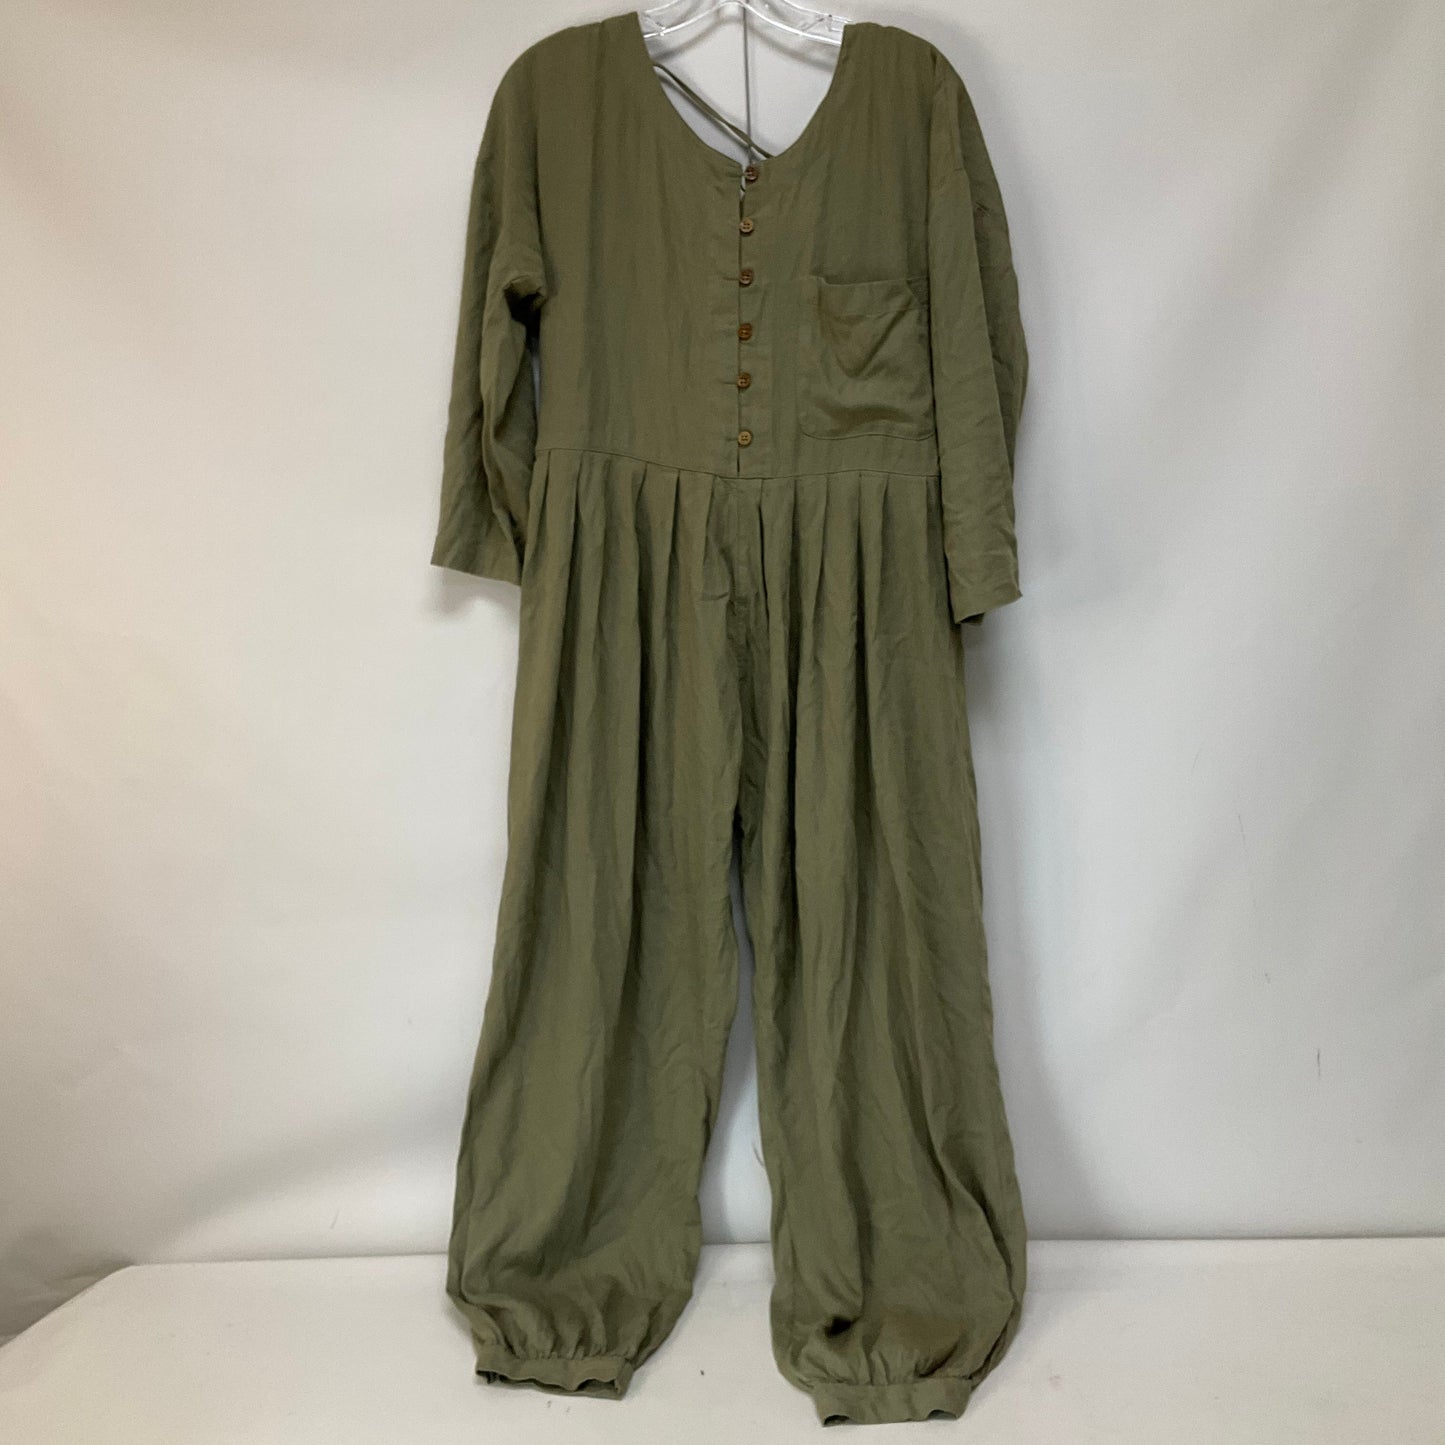 Green Jumpsuit Free People, Size S